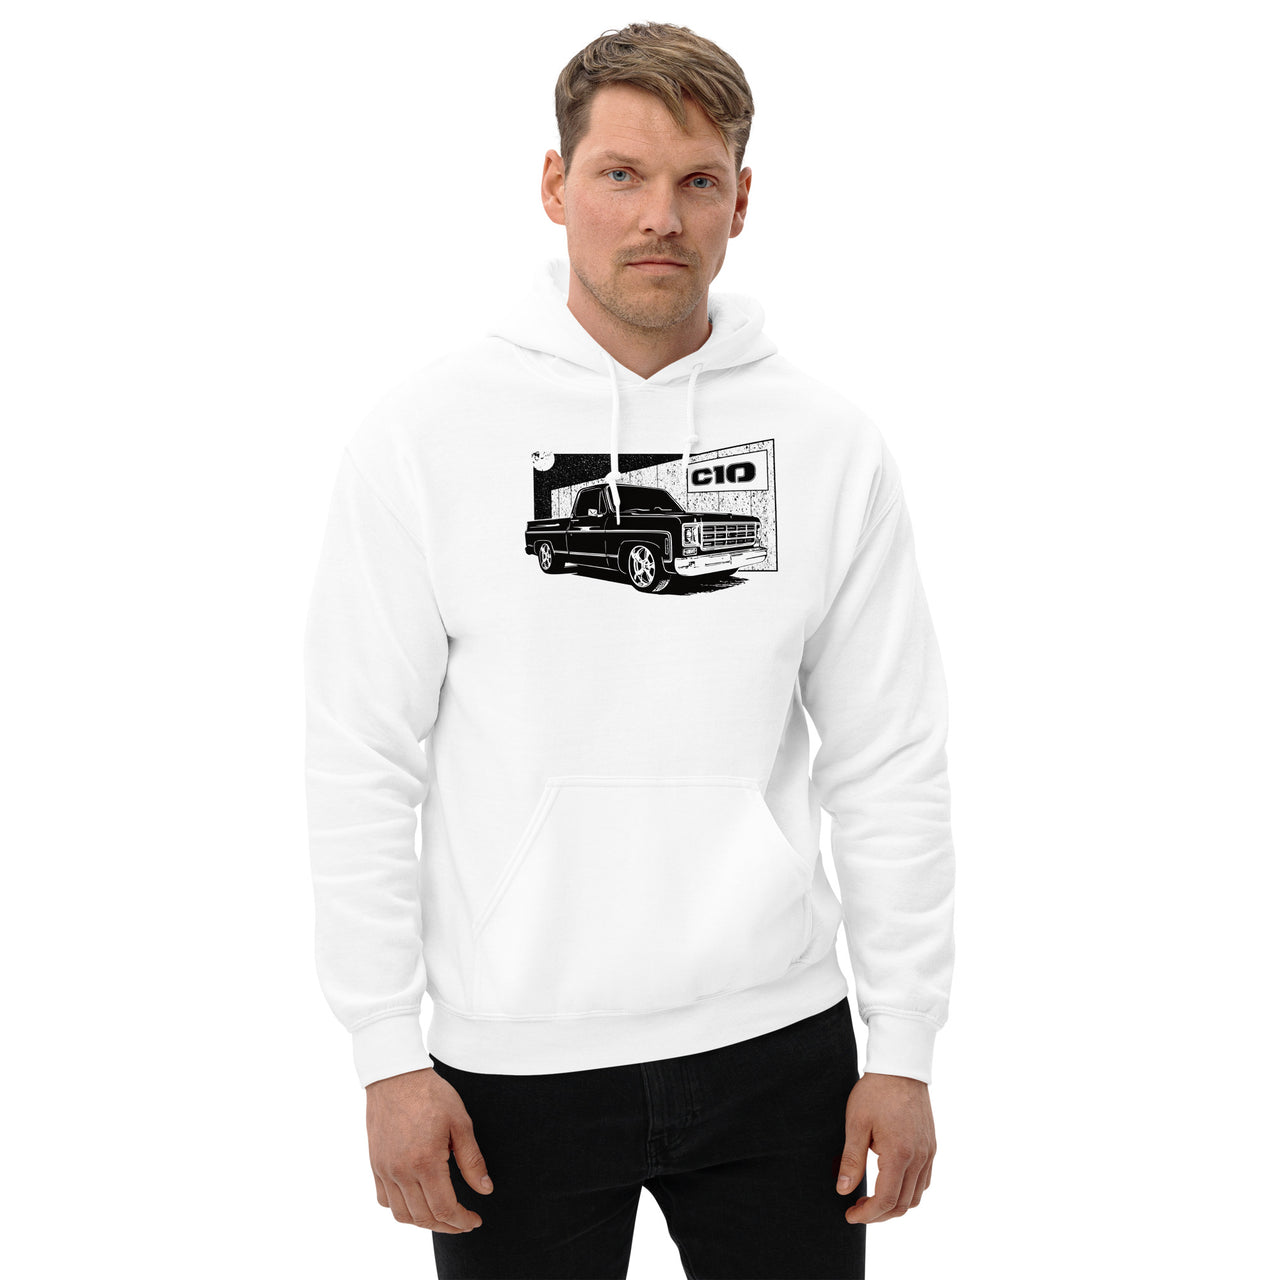 Square Body C10 Hoodie modeled in white